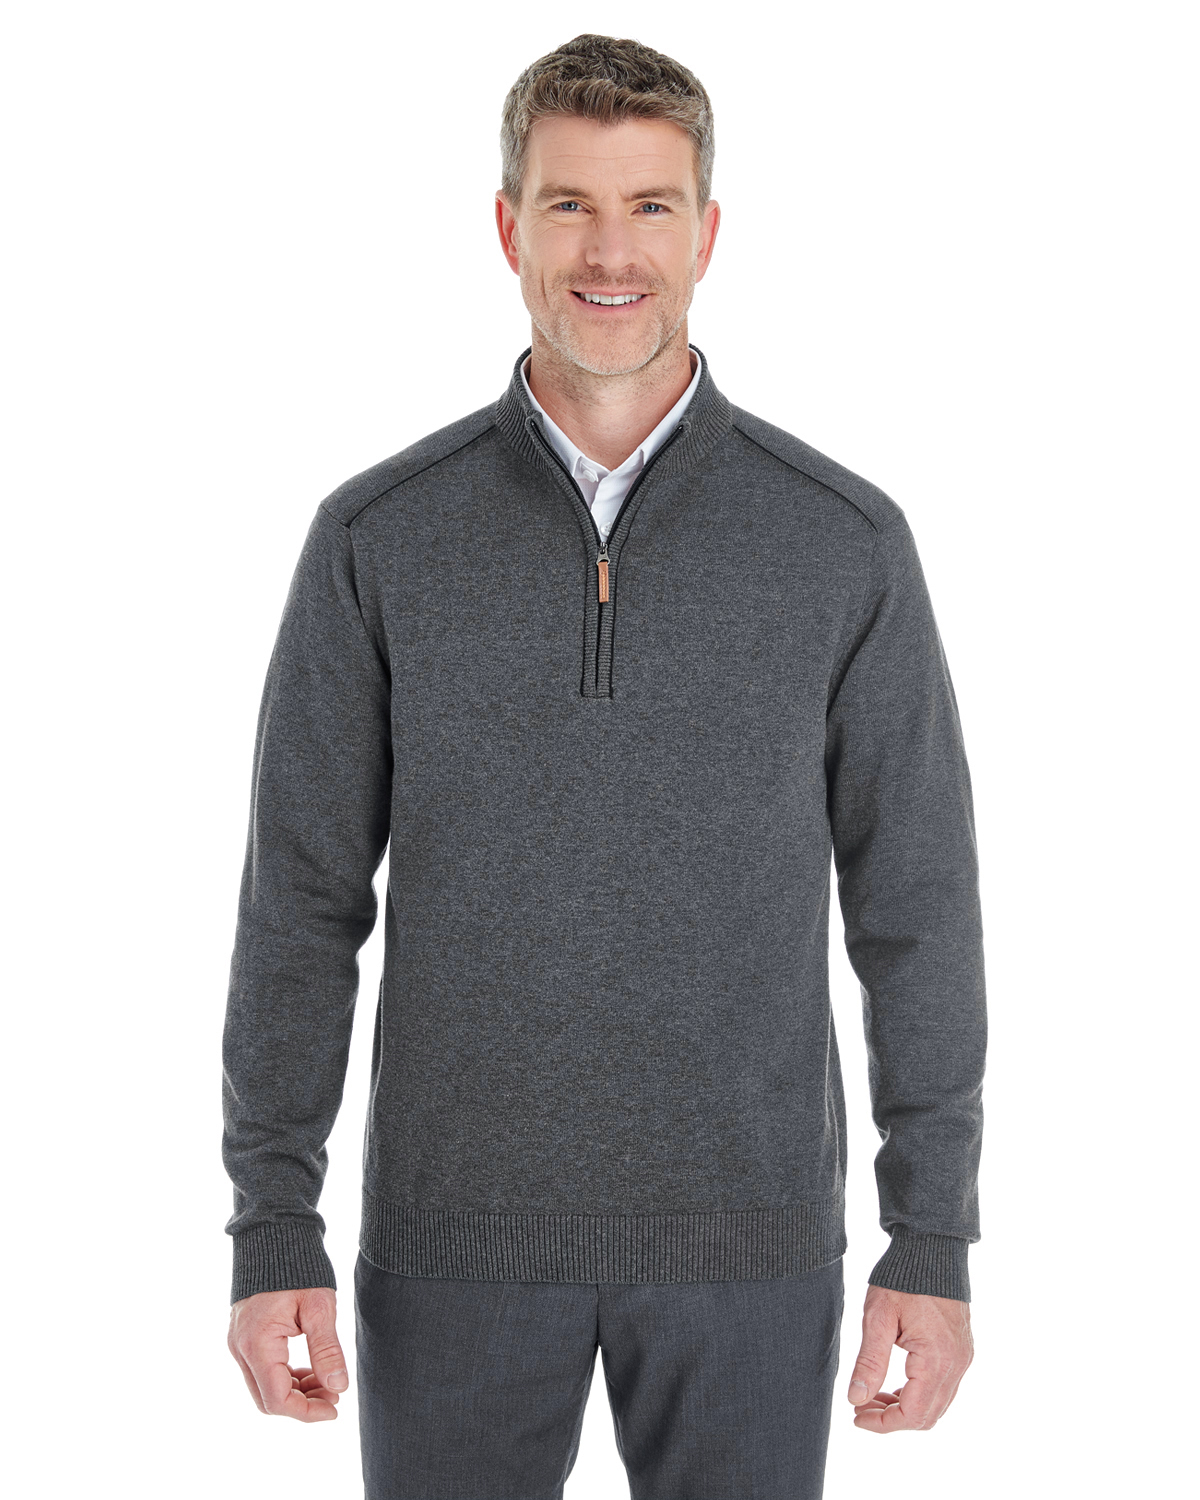 click to view DK GREY HTH/ BLK